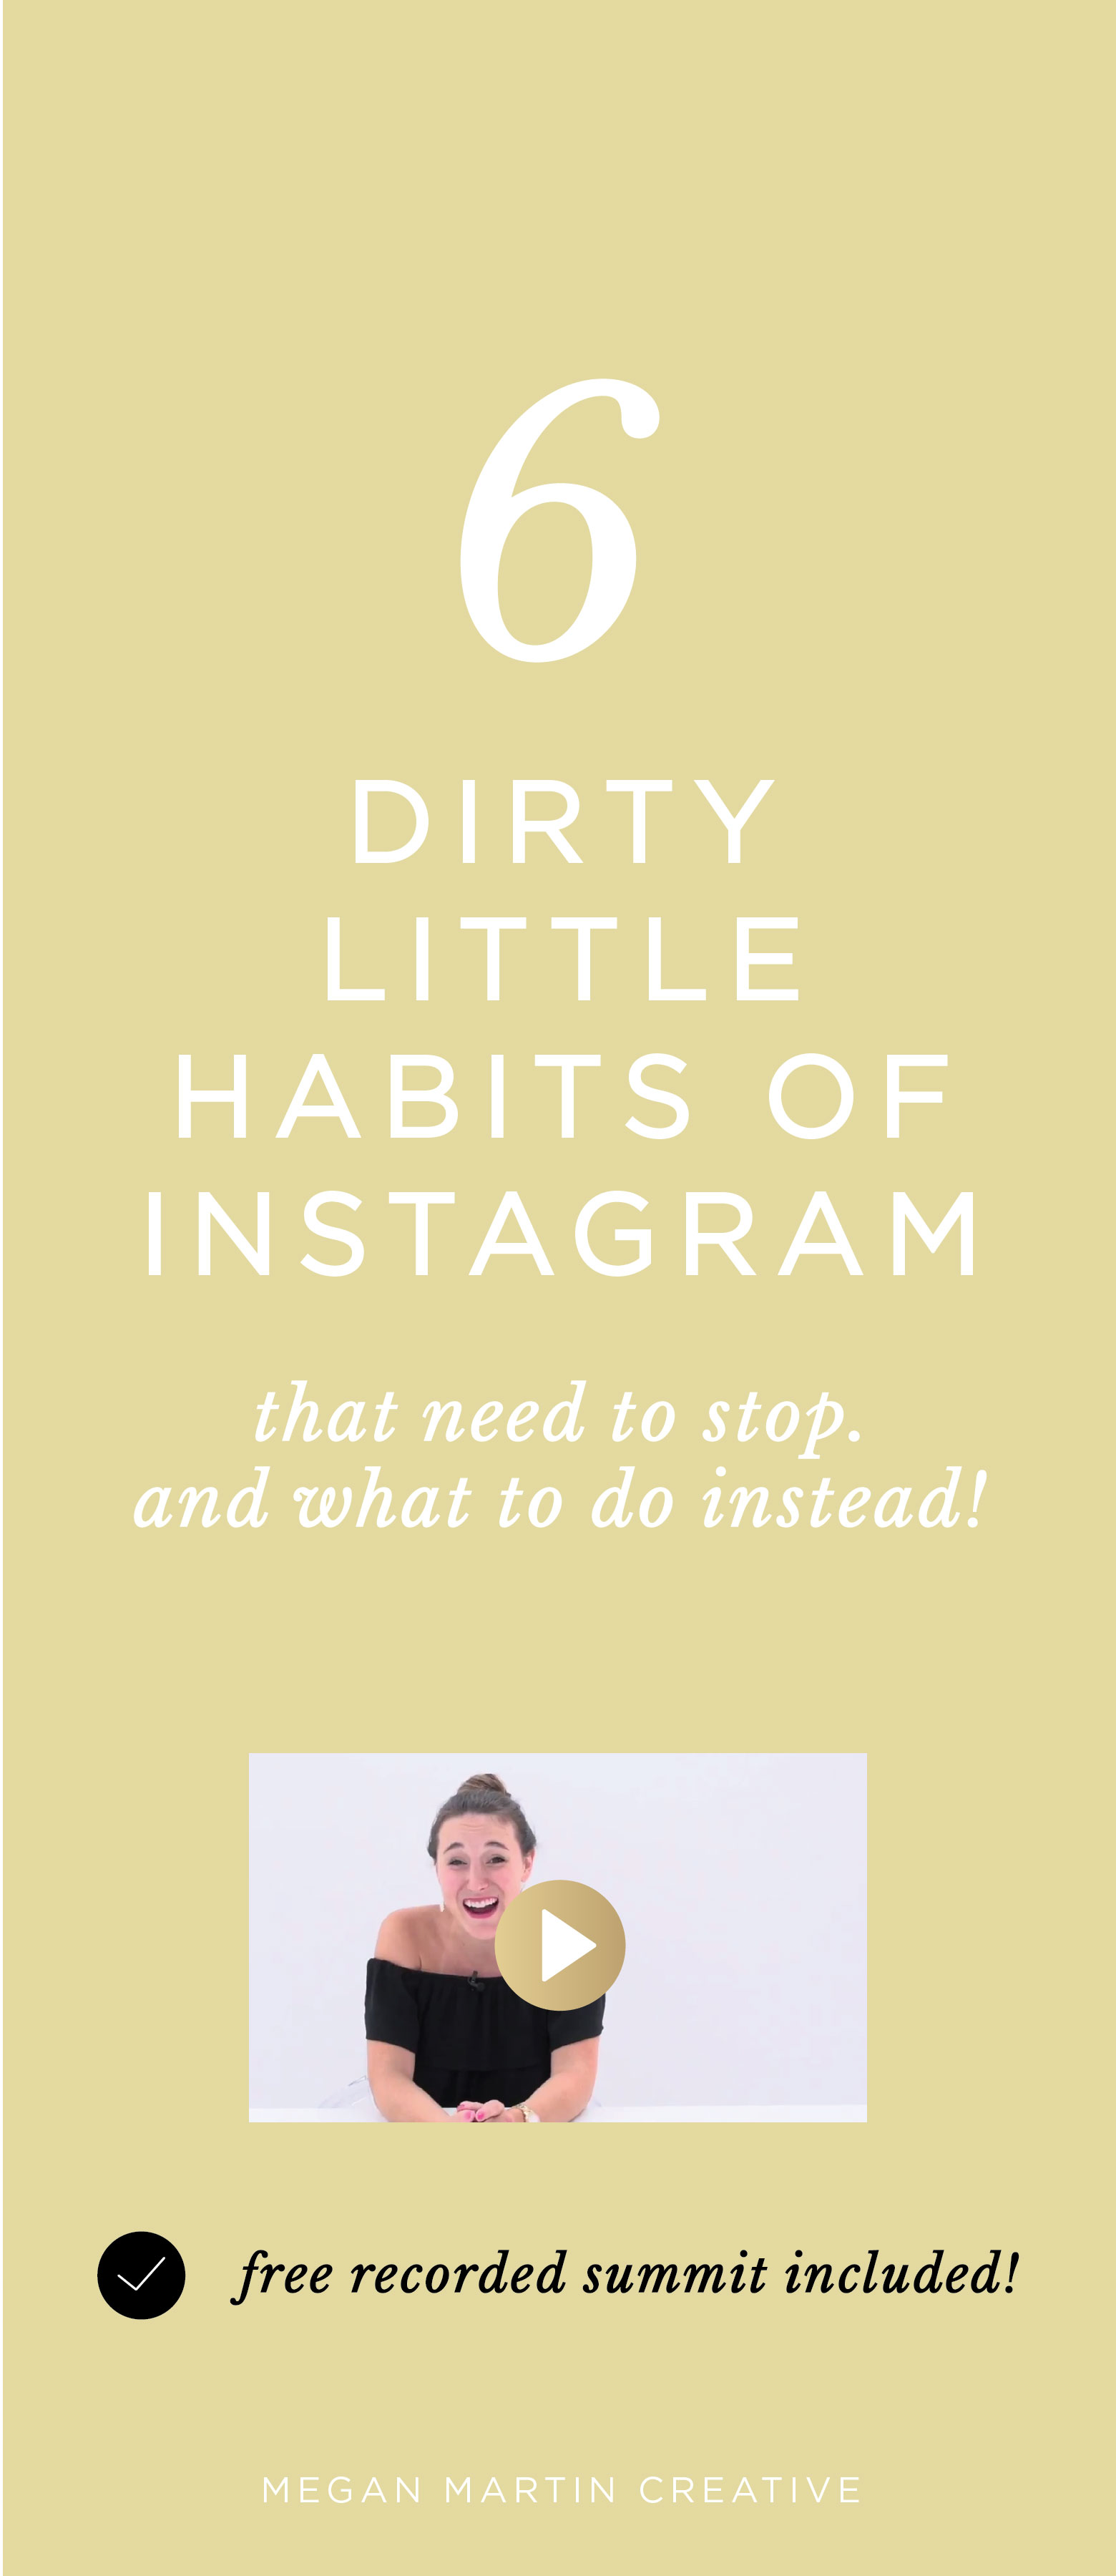 how to grow Instagram following the authentic way, instagram tips, social media tips, entrepreneur